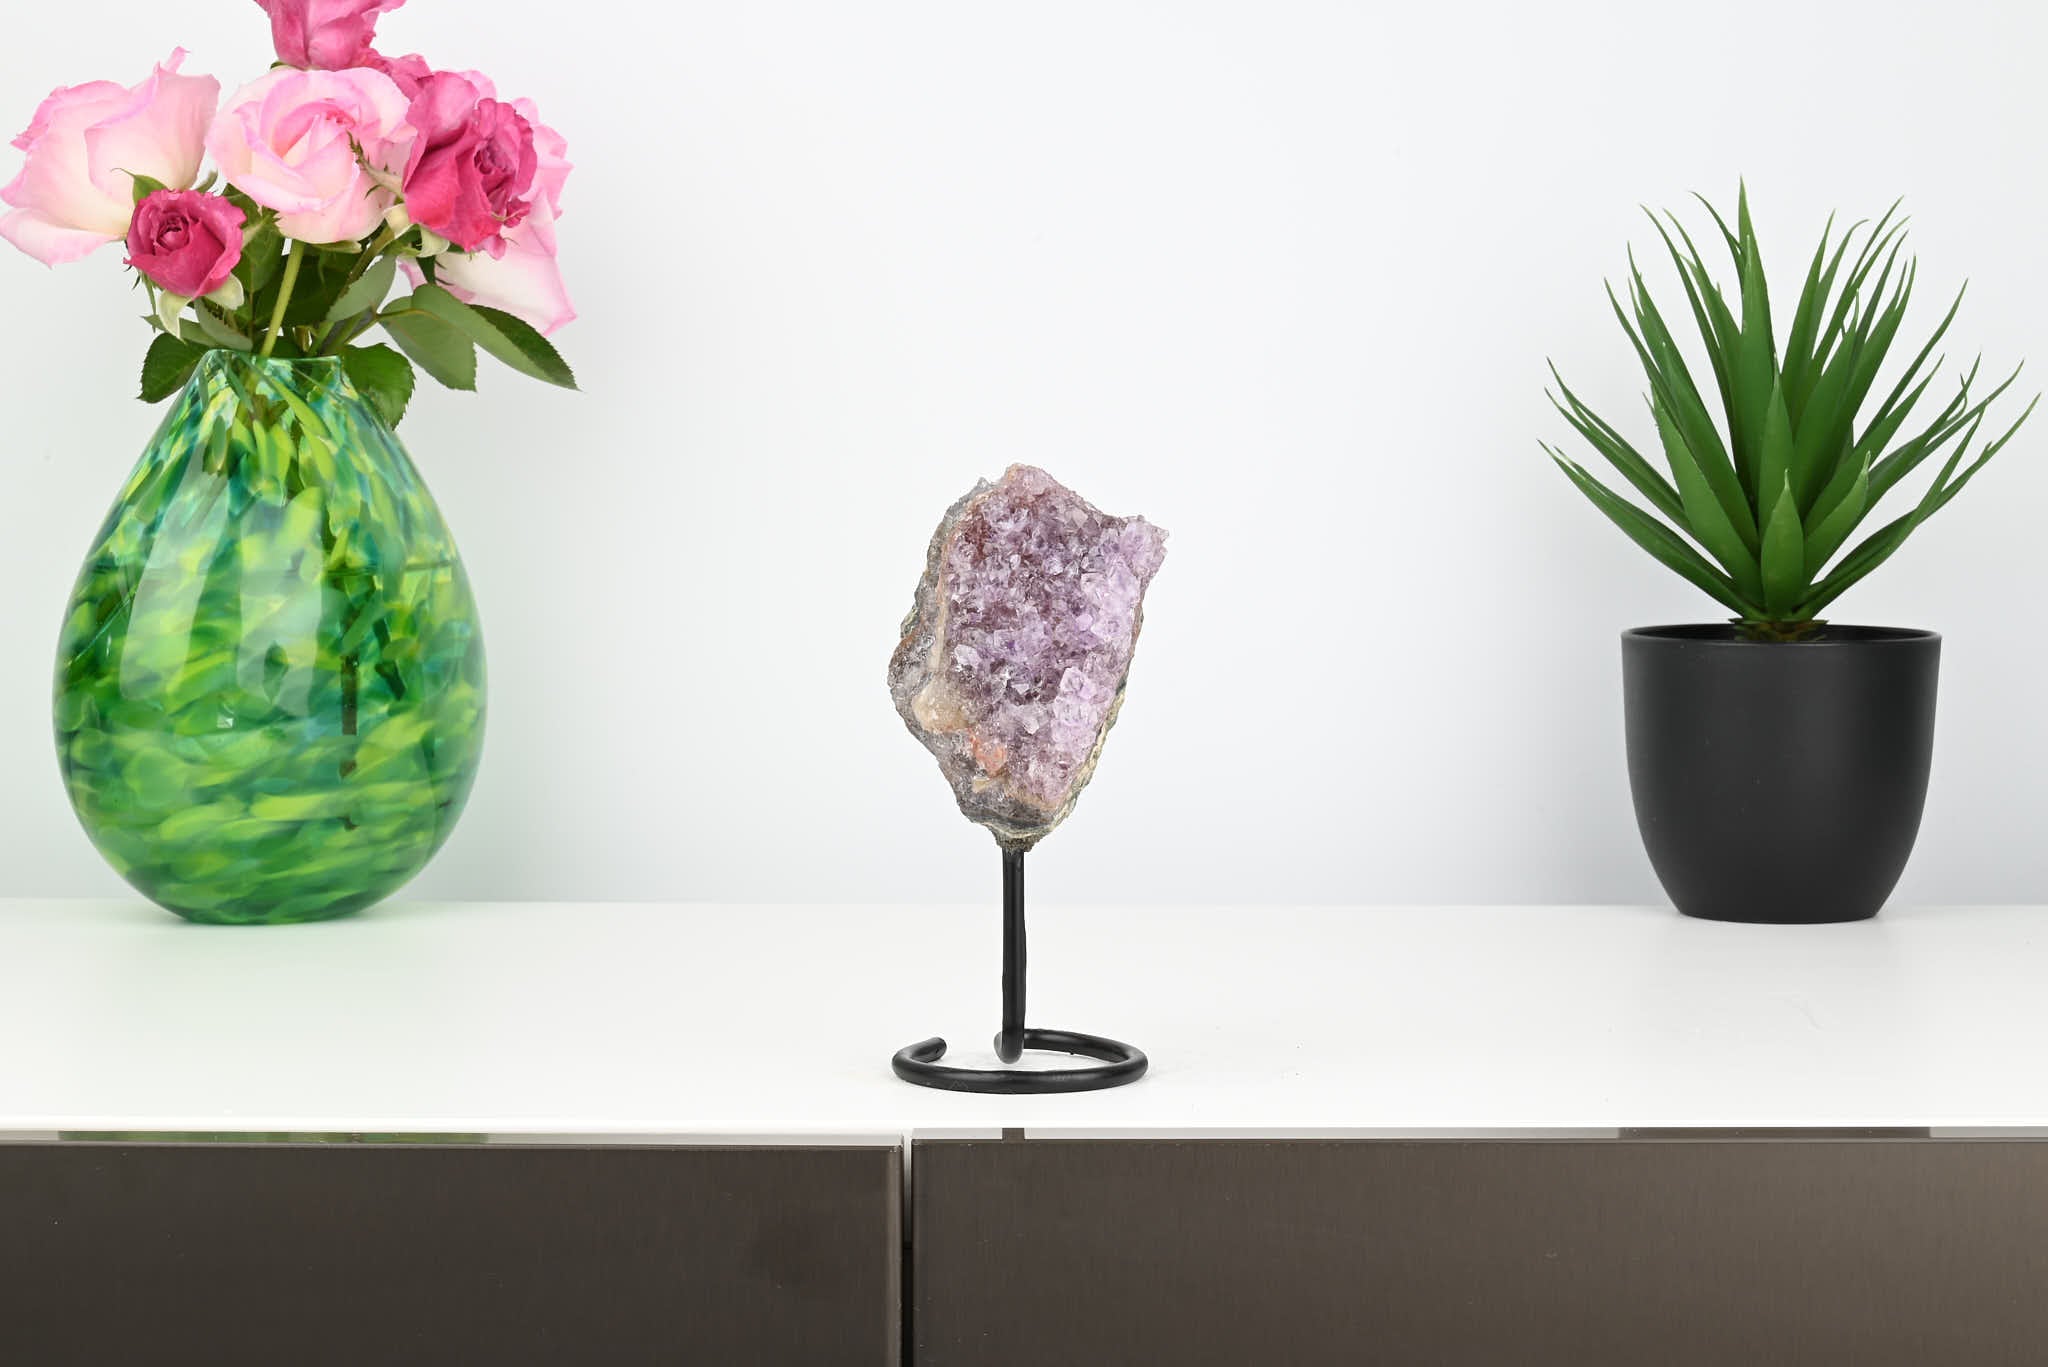 Amethyst Cluster on Stand - Small 16cm Tall - #CLUSAM-63029